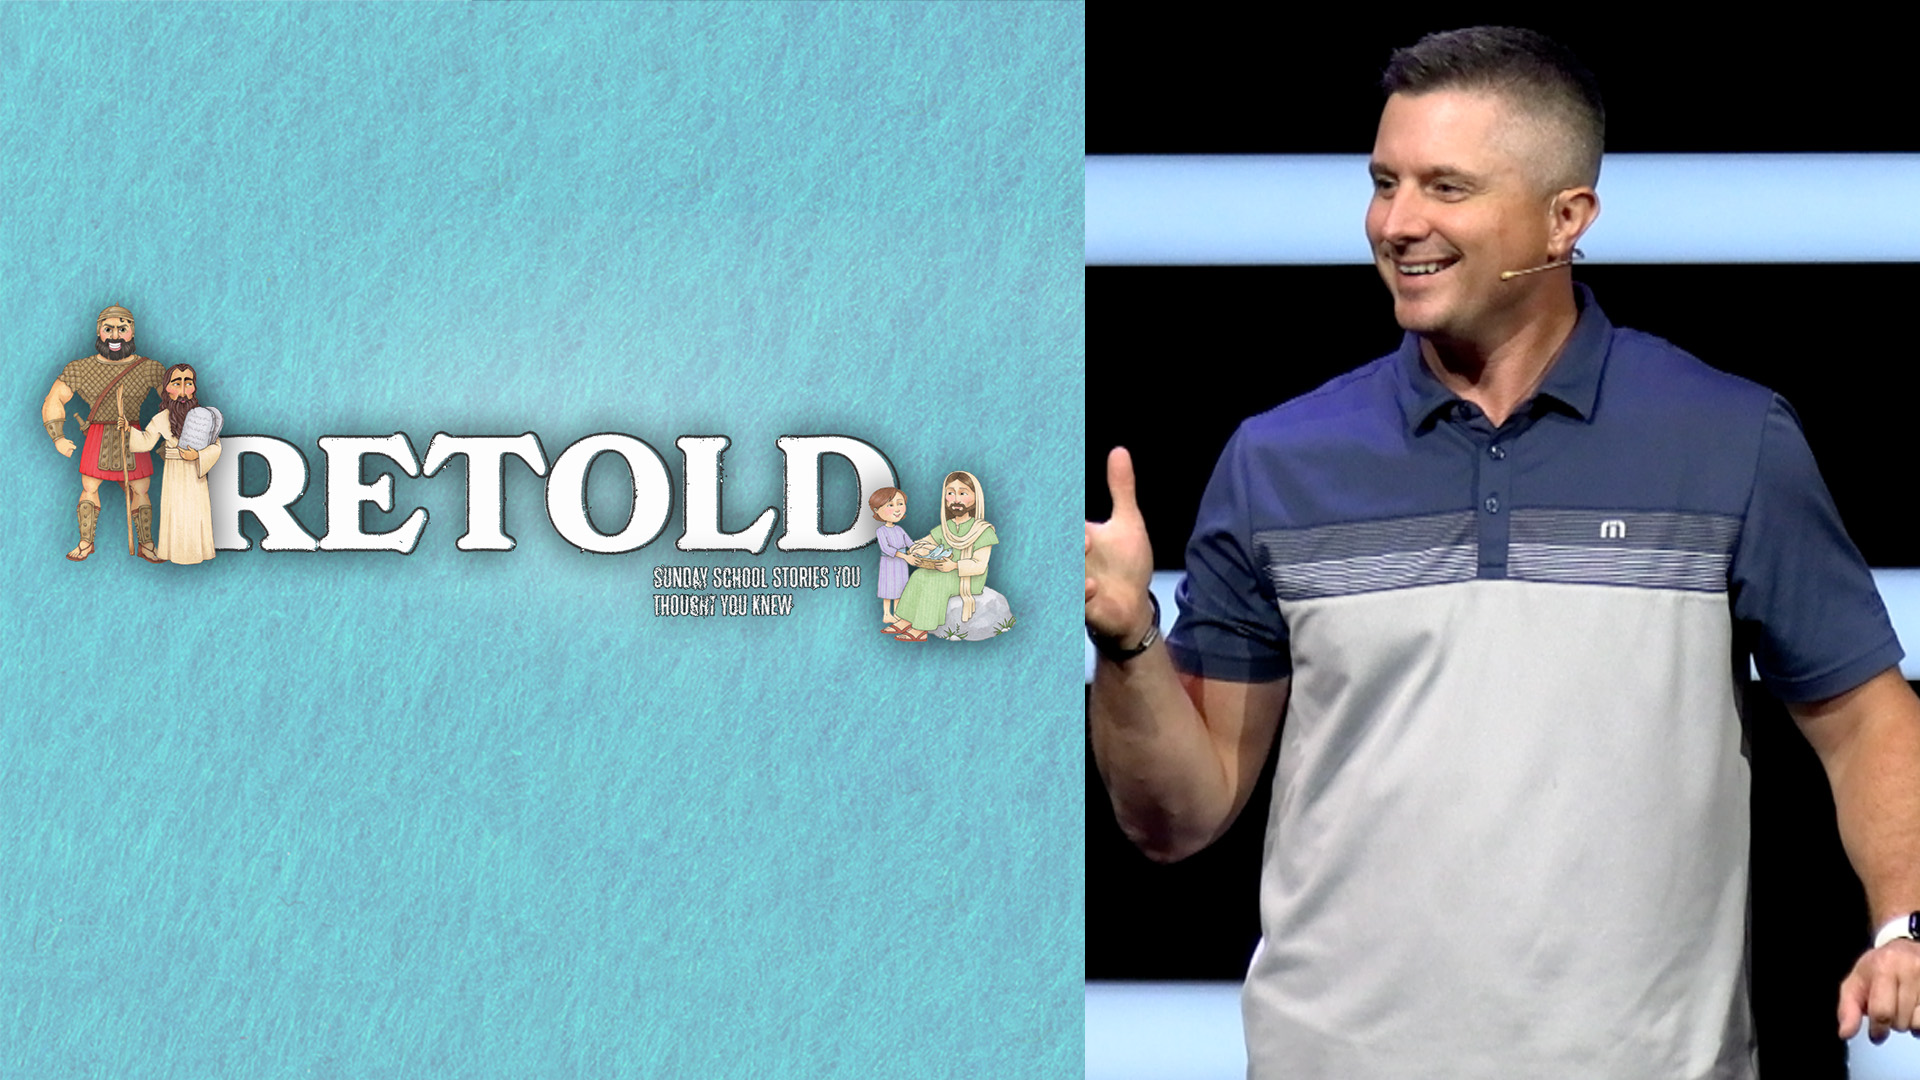 Retold - Sunday School Stories You Thought You Knew - David & Goliath